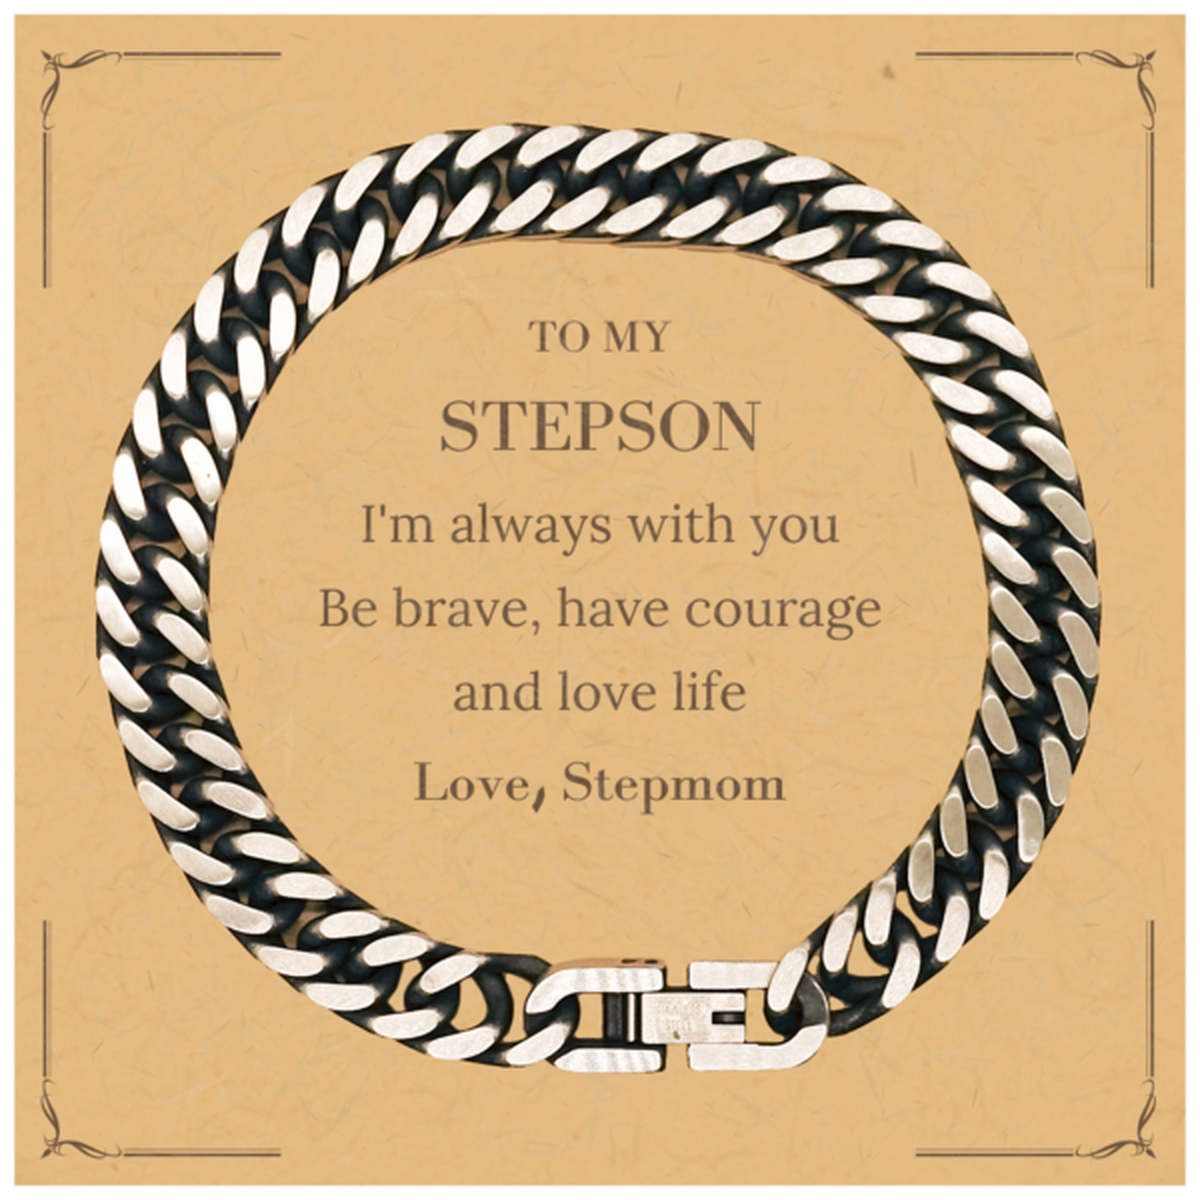 To My Stepson Gifts from Stepmom, Unique Cuban Link Chain Bracelet Inspirational Christmas Birthday Graduation Gifts for Stepson I'm always with you. Be brave, have courage and love life. Love, Stepmom